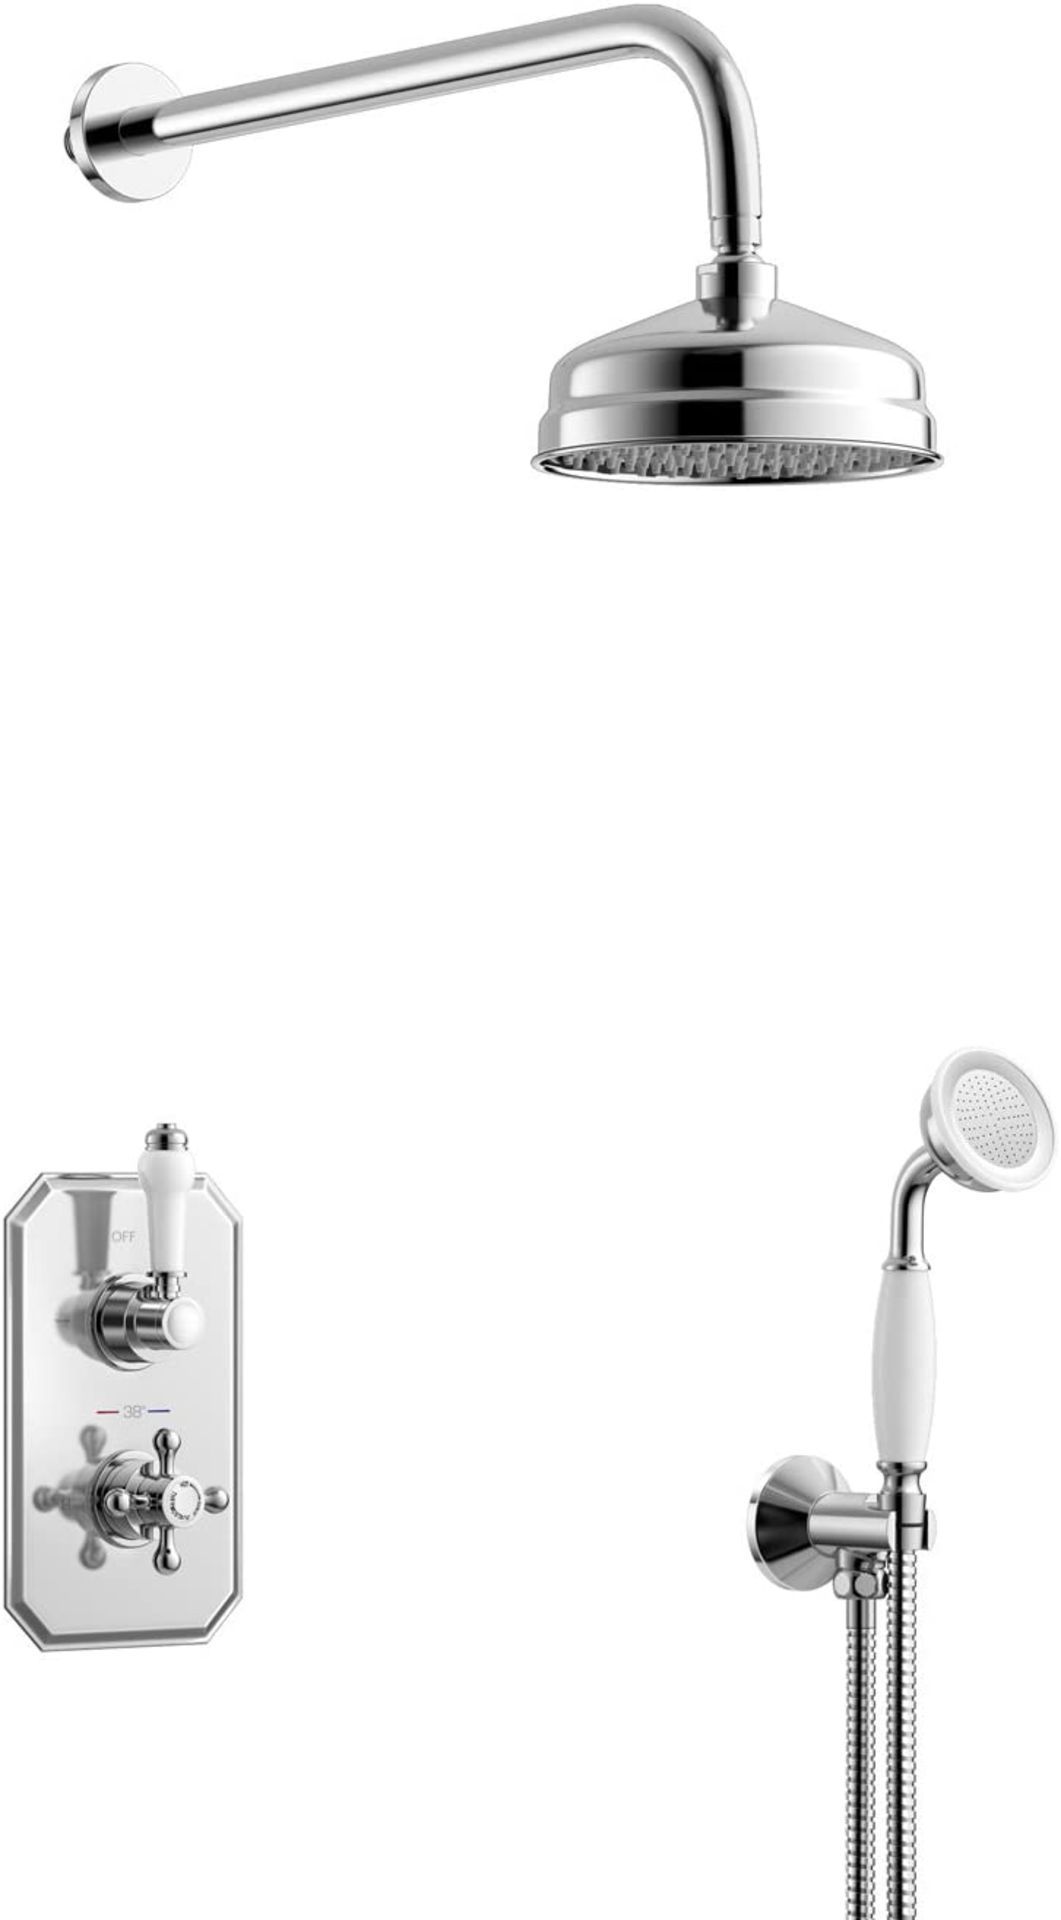 New & Boxed 150mm Traditional Stainless Steel Wall Mounted Head, Rail Kit. RRP £511.99.Ss2Wctr... - Image 2 of 2